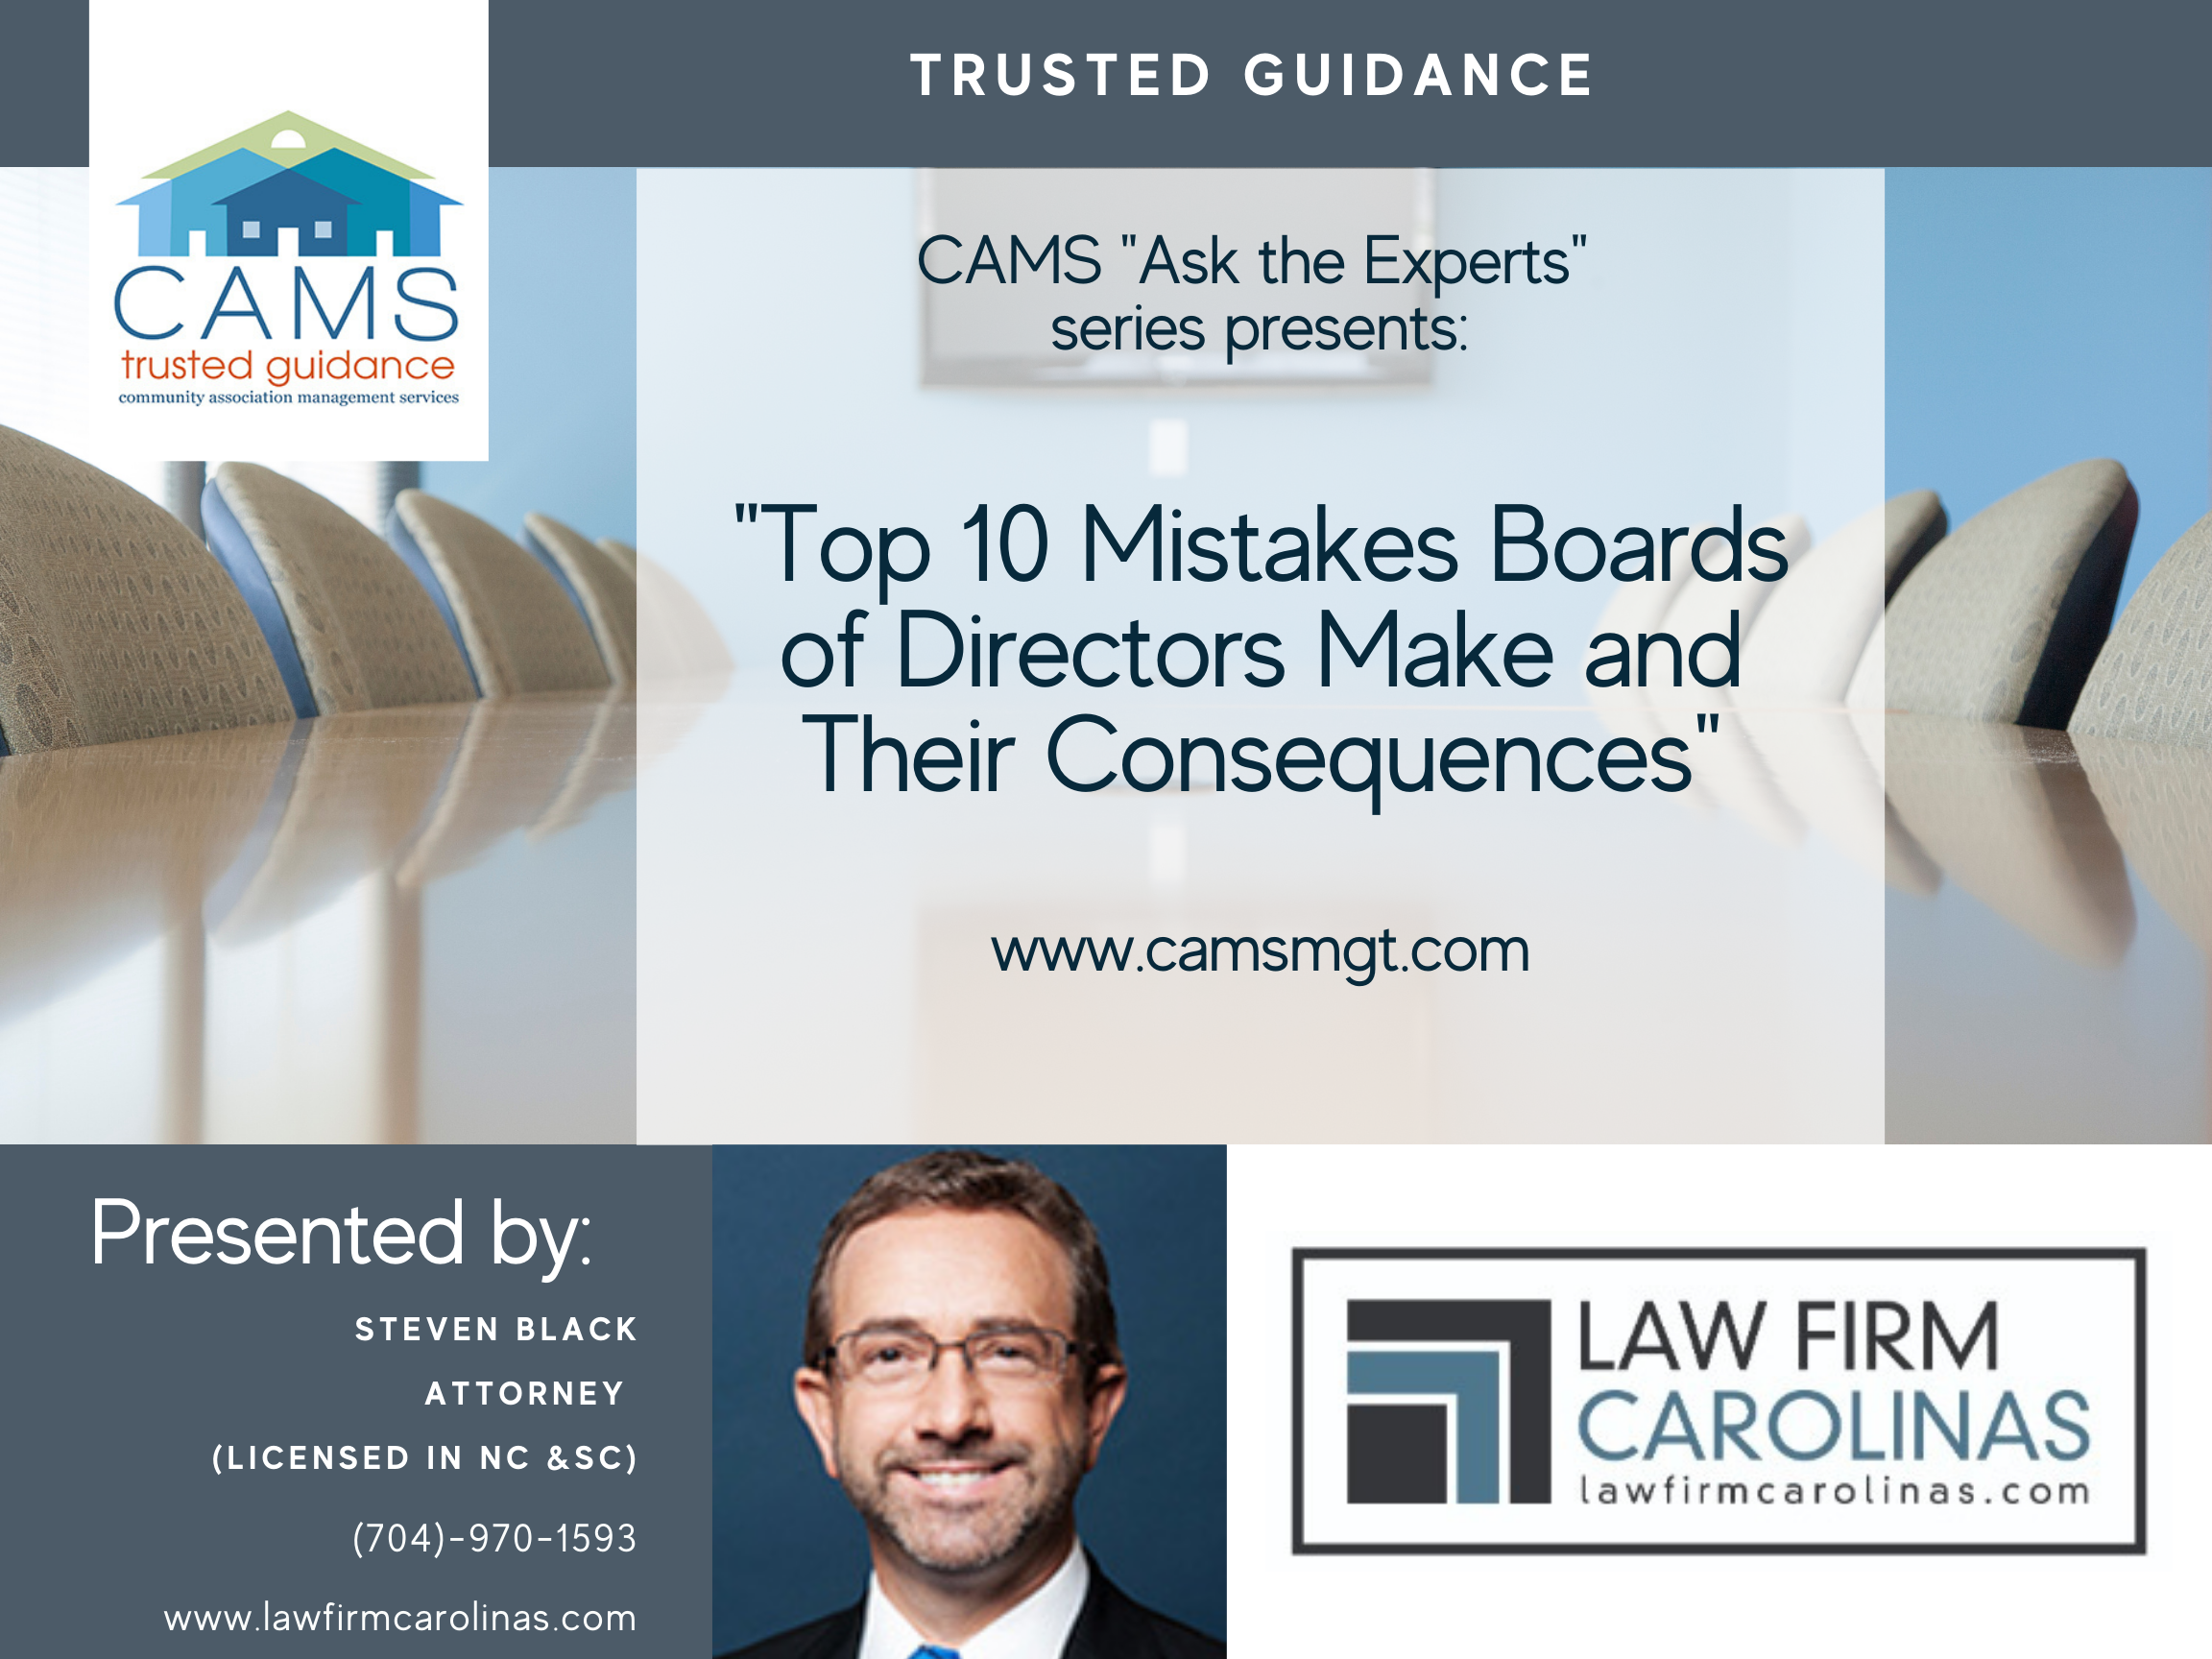 Top 10 Mistakes Boards of Directors Make and Their Consequences